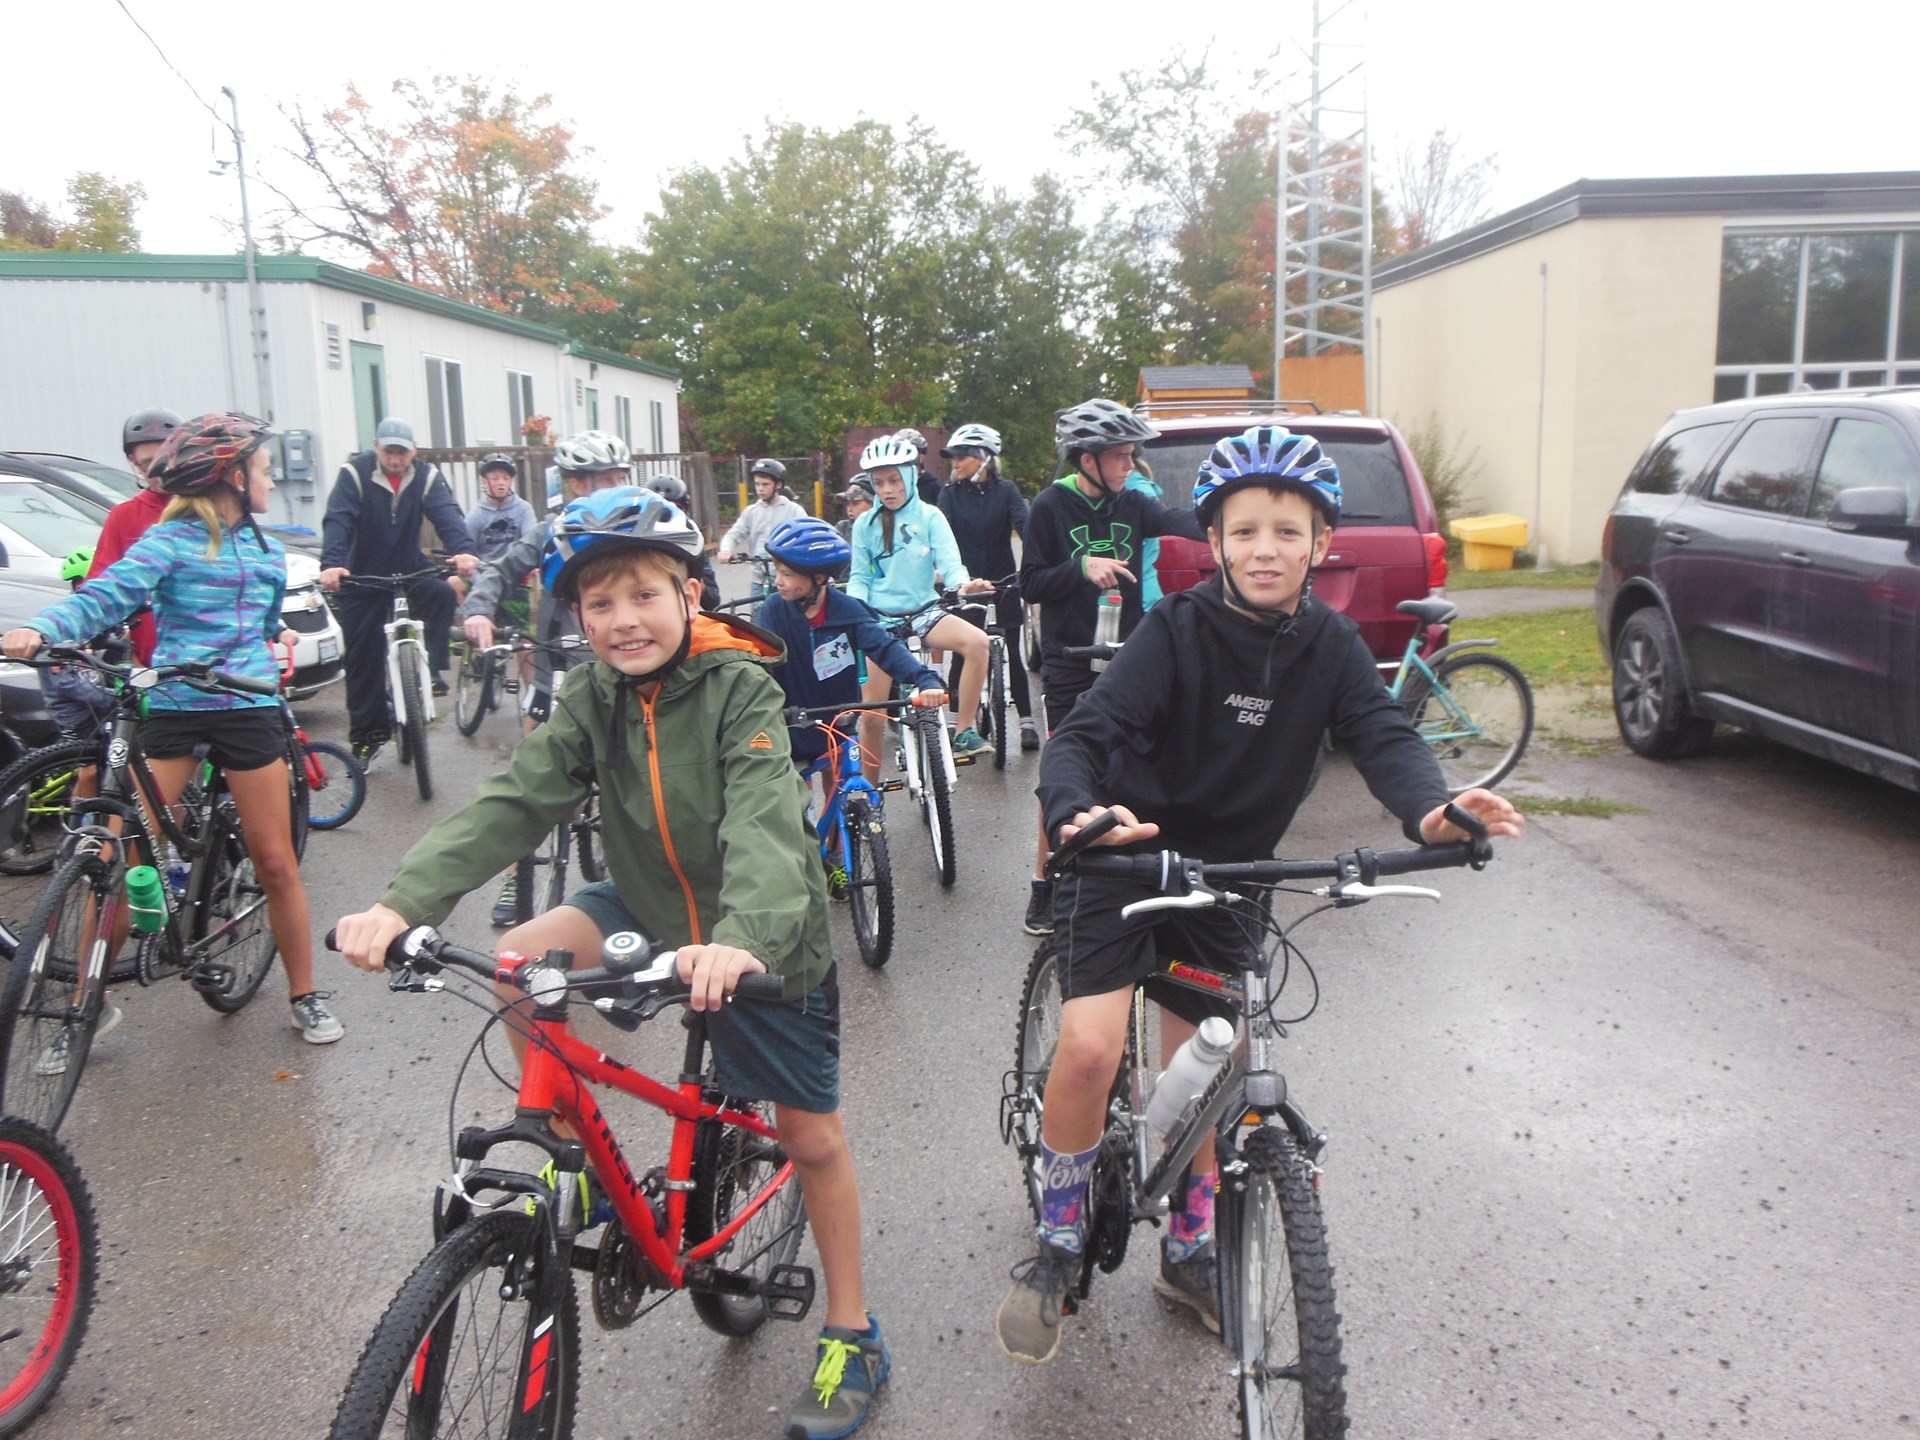 Students preparing for a bike ride.